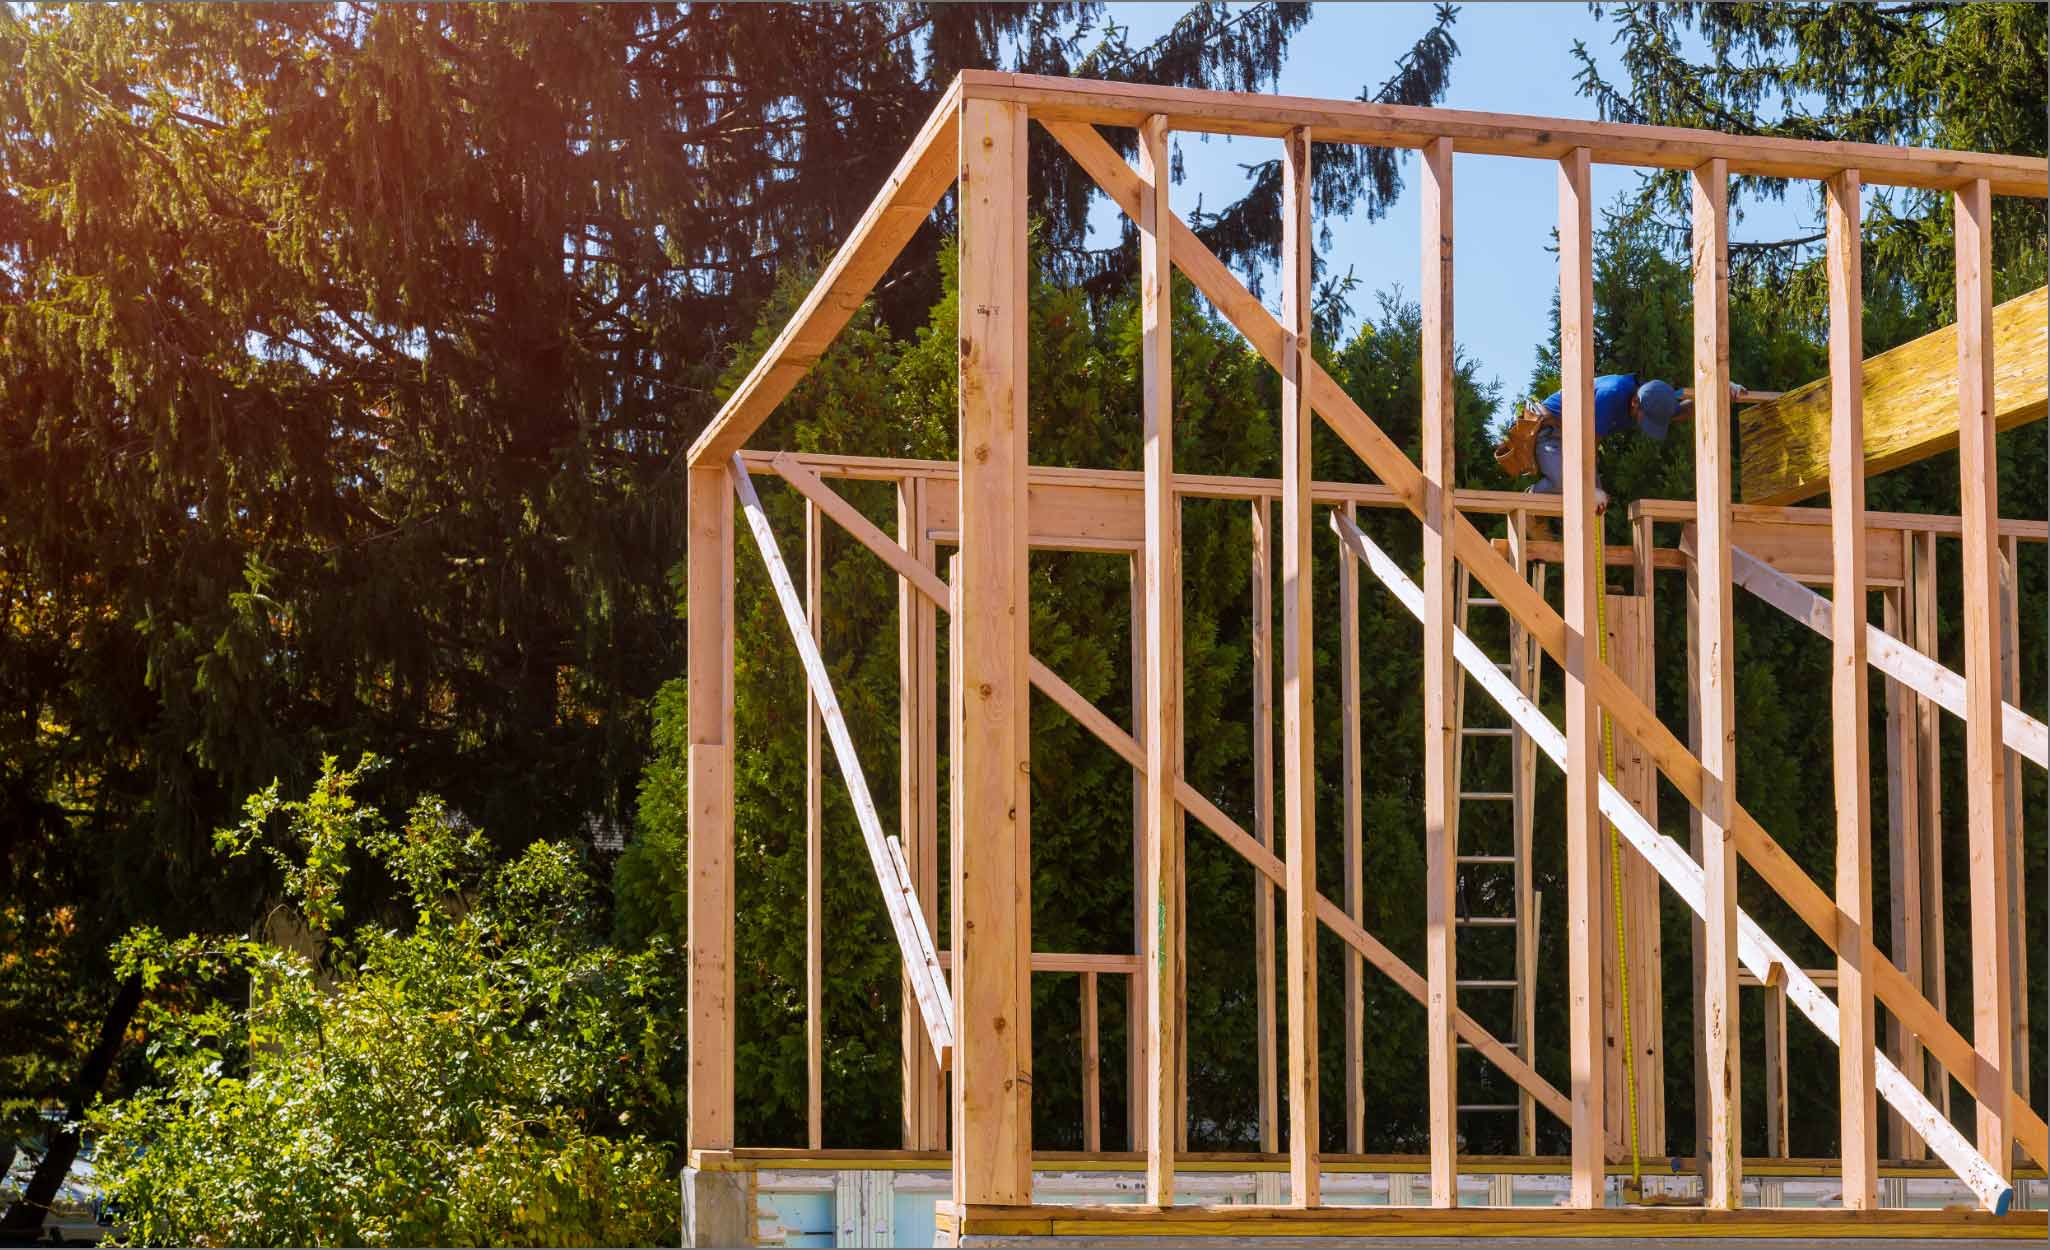 Construction Worker Builds Wood Frame Home Addition